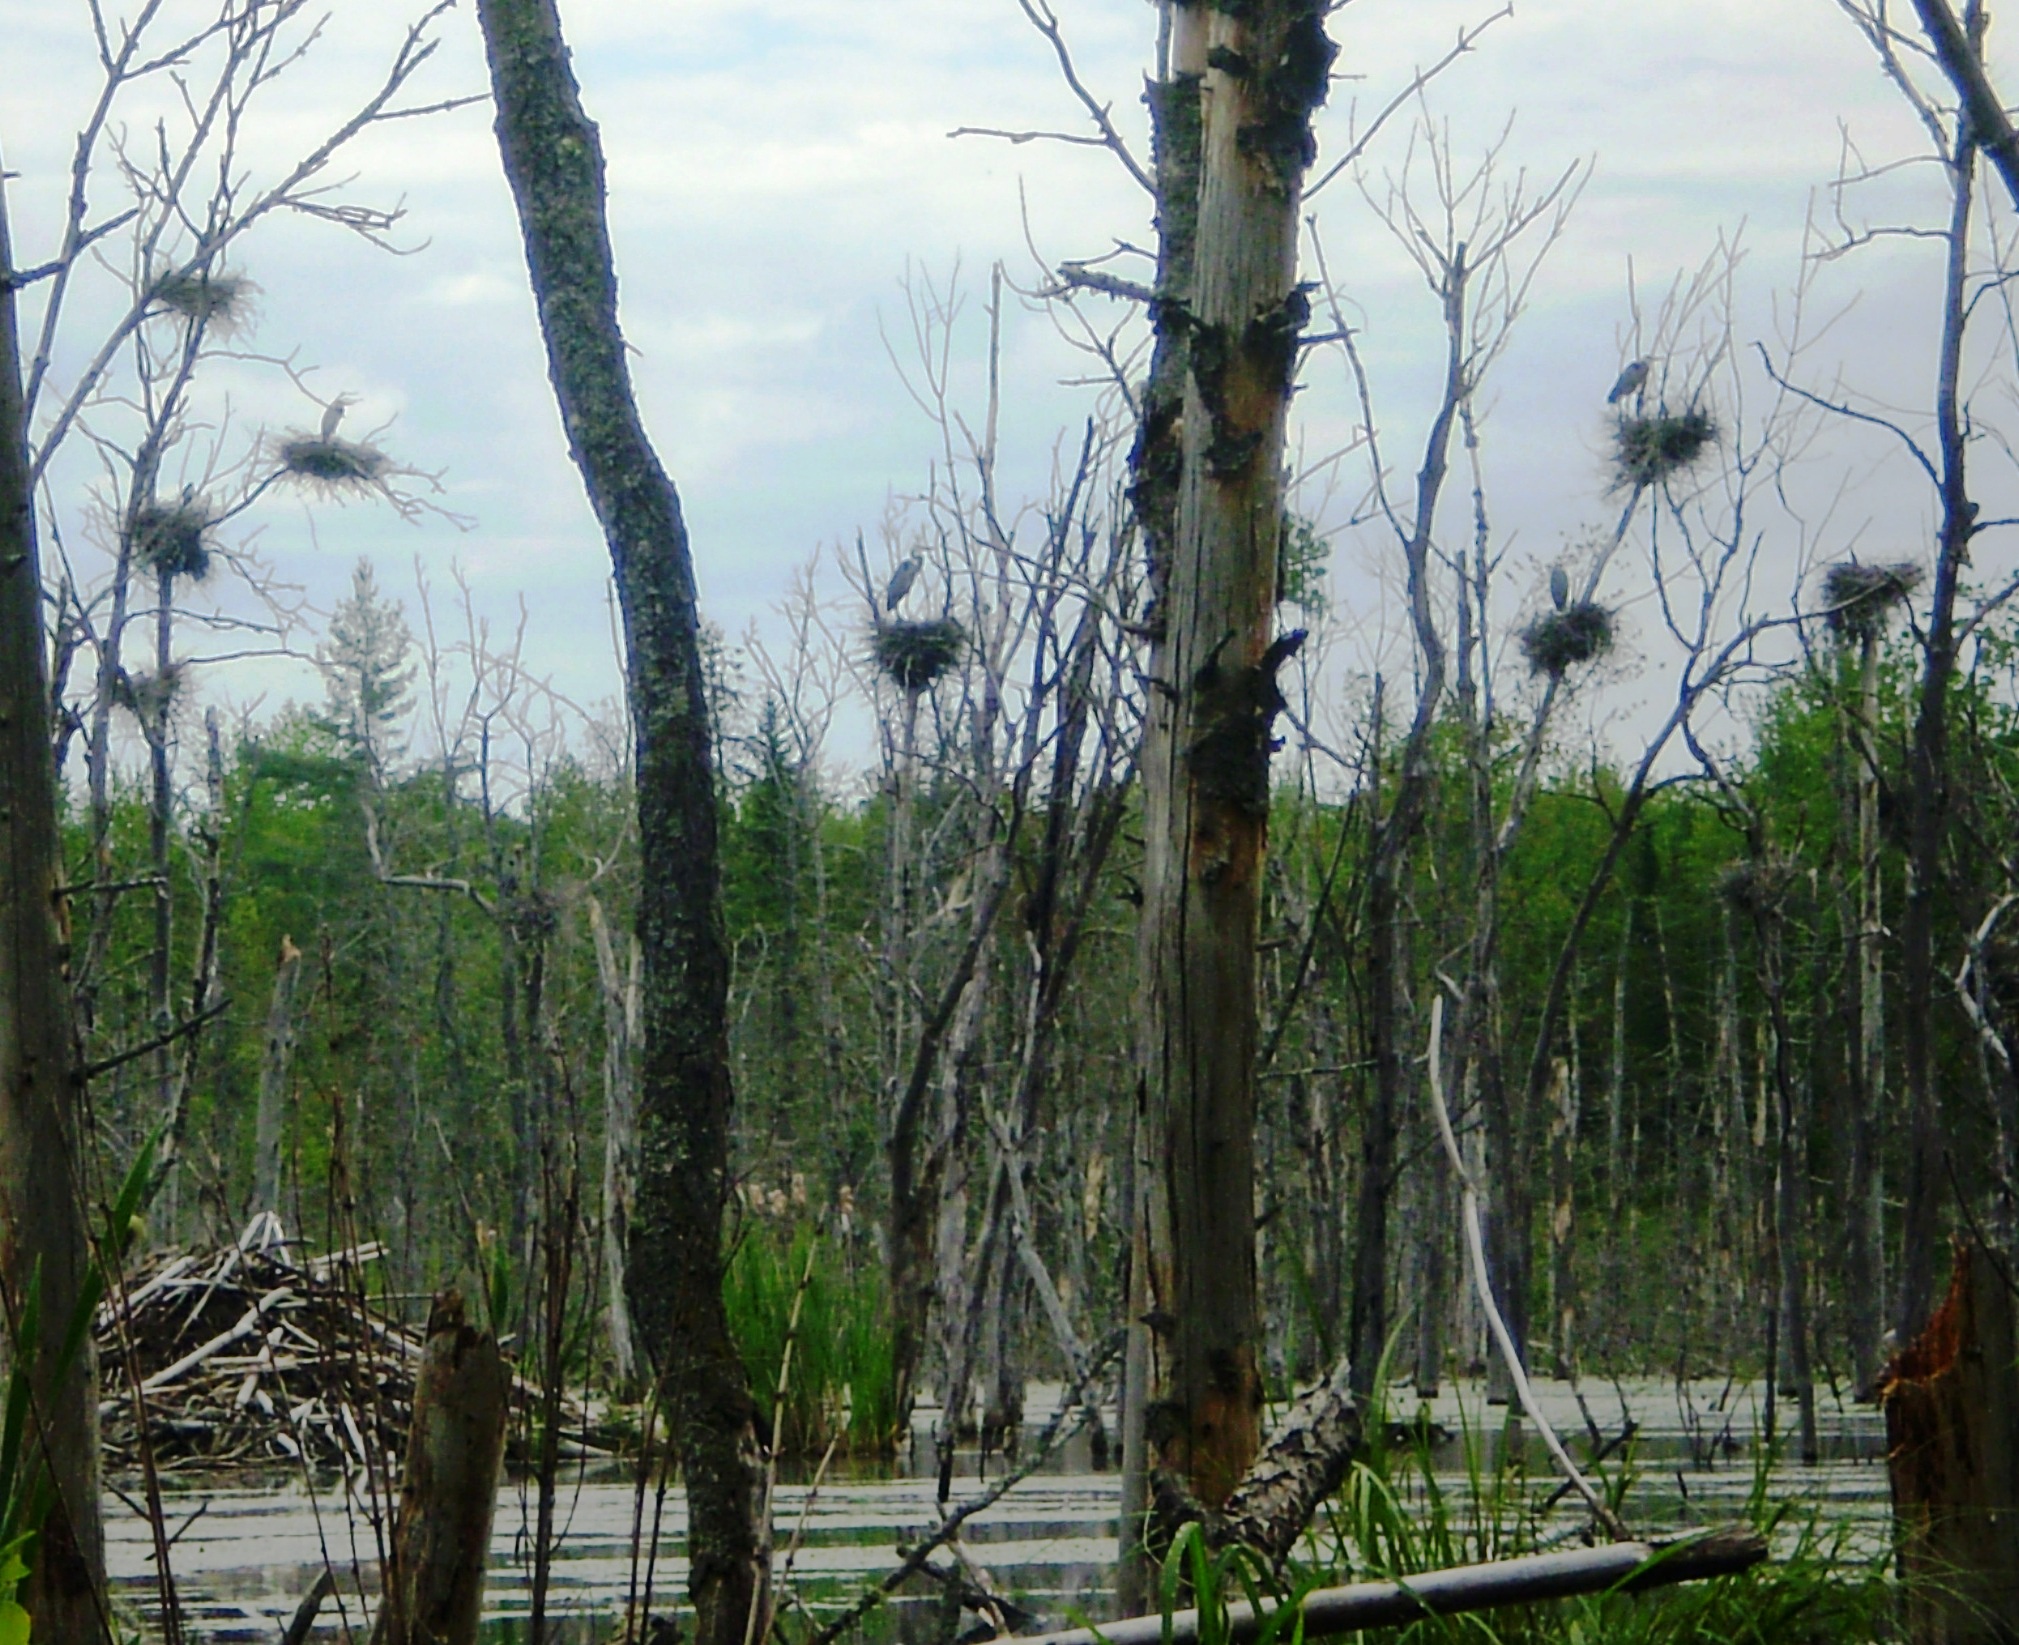 Great blue heron nests are often found in snags located in beaver flowages. Photo by Michael Merchant.